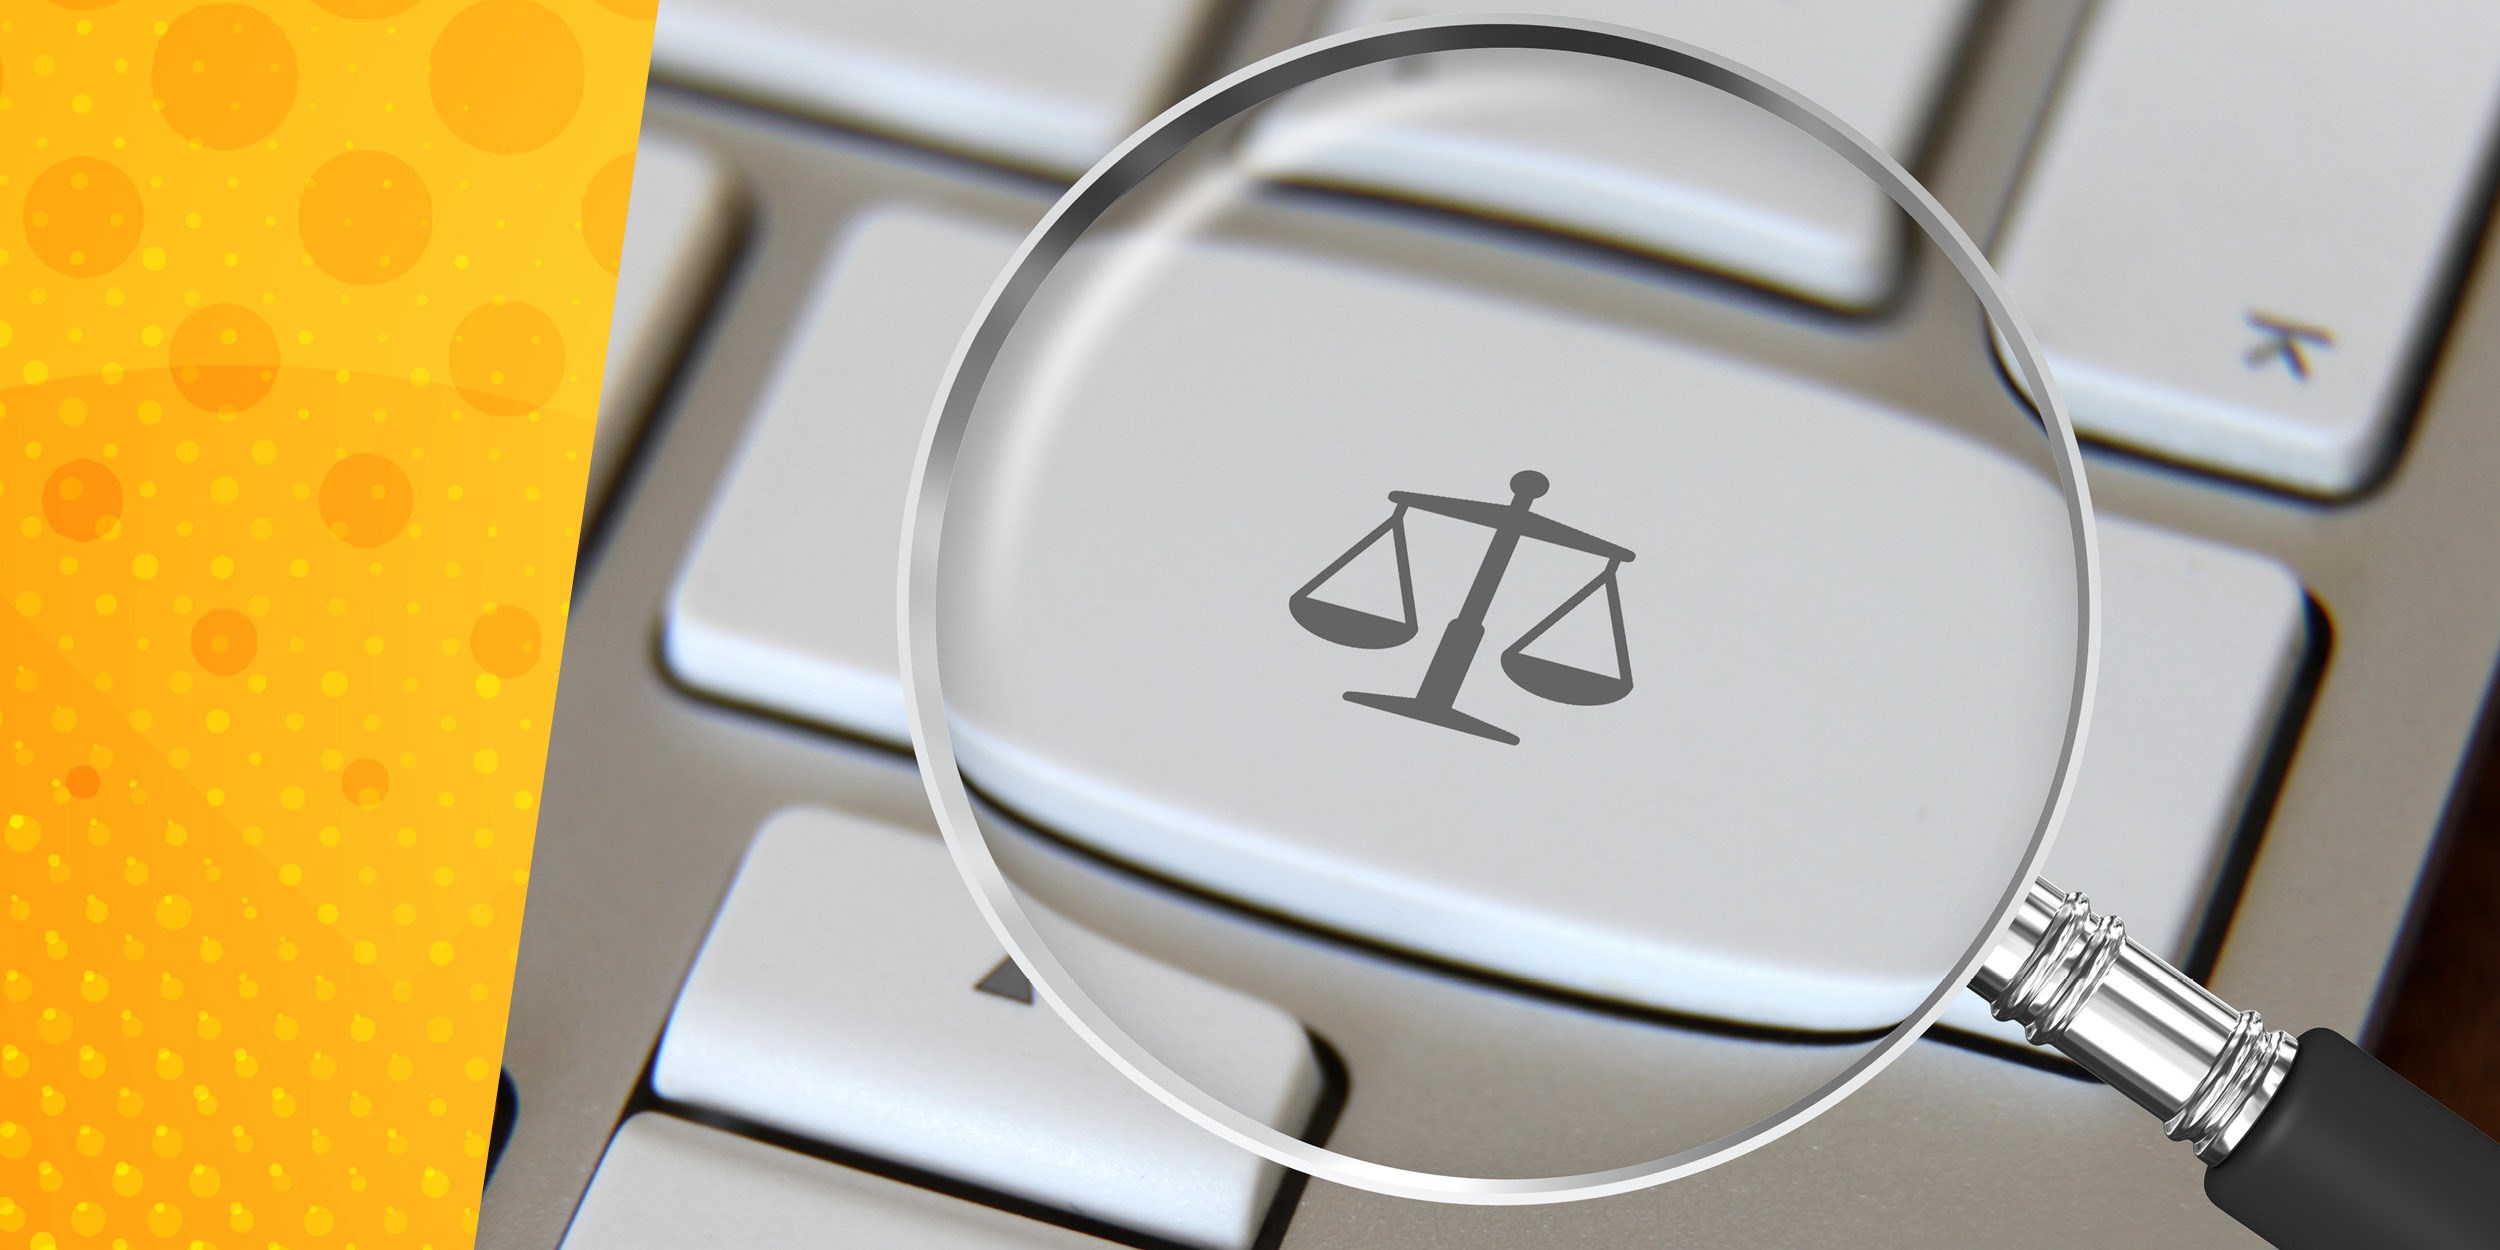 magnifying glass over keyboard with law scales icon